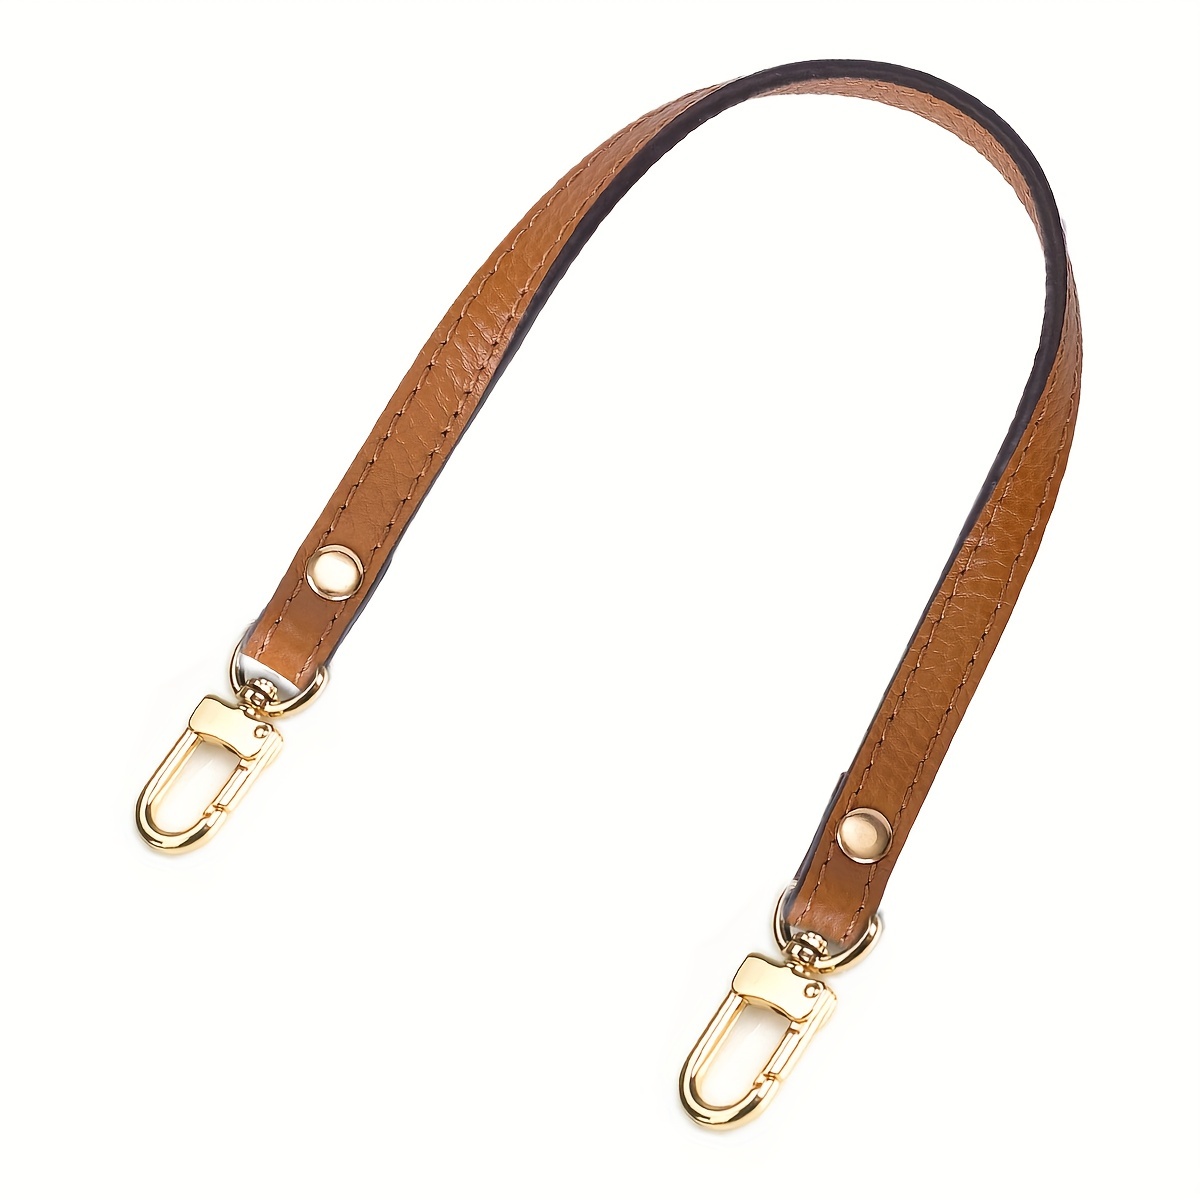 Brown Leather Purse Strap Replacement For Handbag Bag Crossbody